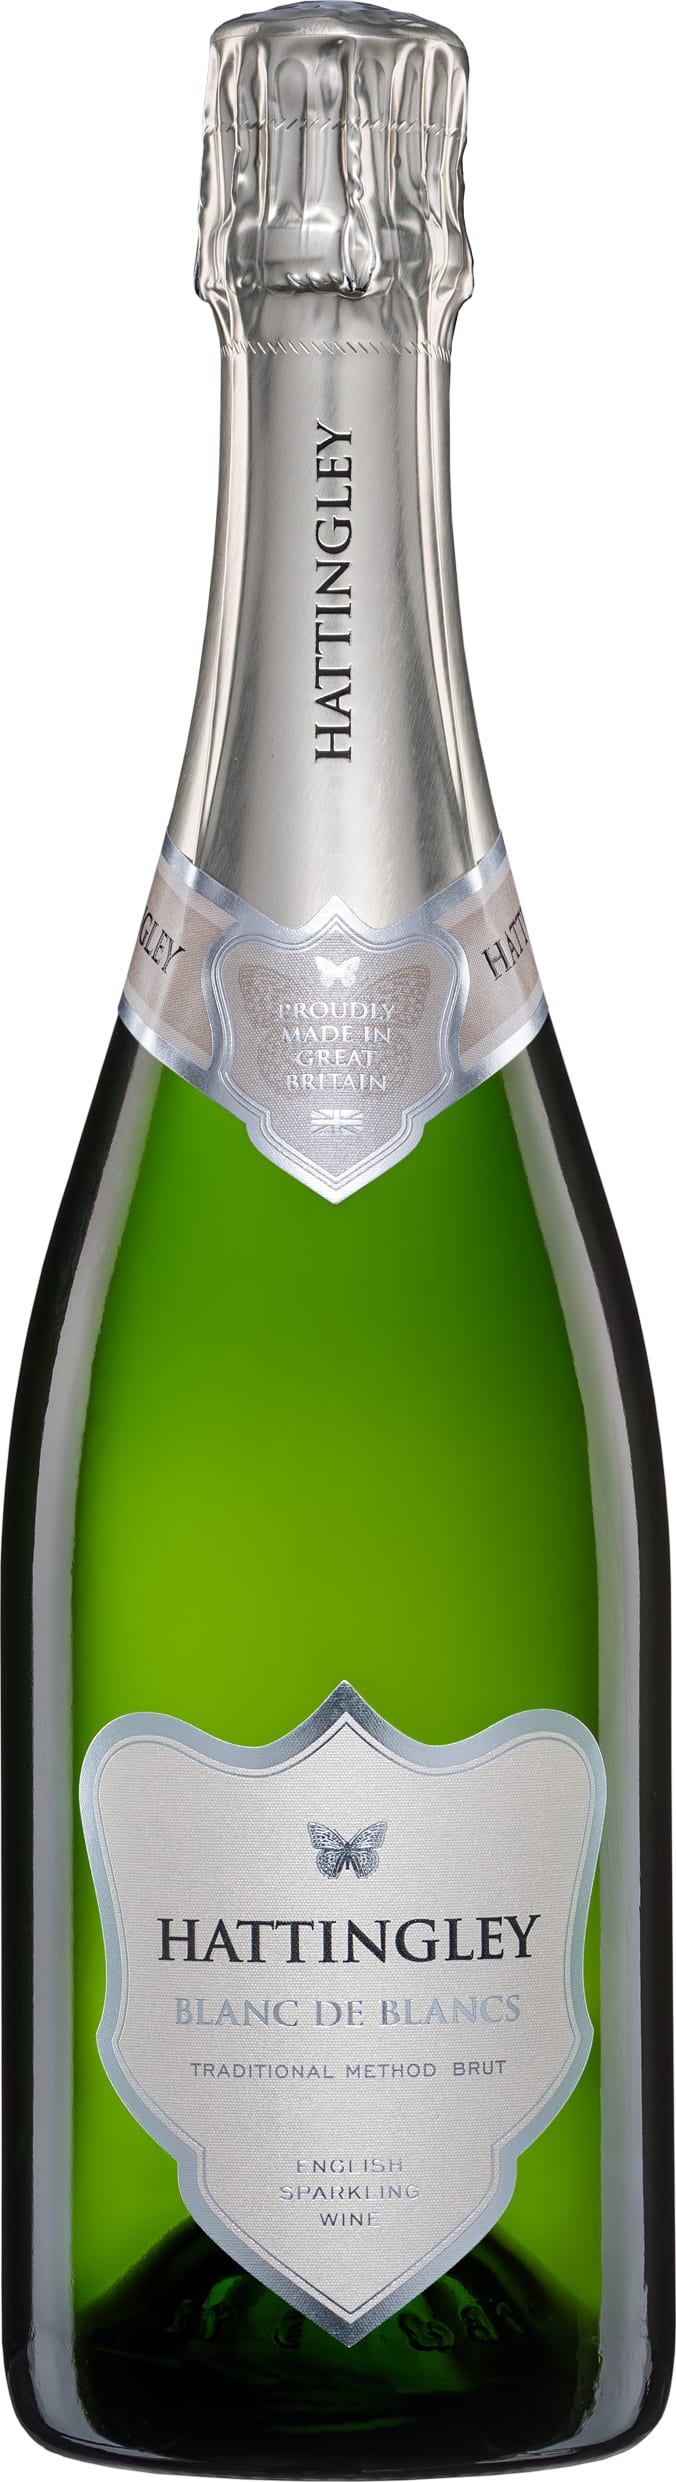 Hattingley Valley Blanc de Blancs 2015 75cl - Buy Hattingley Valley Wines from GREAT WINES DIRECT wine shop